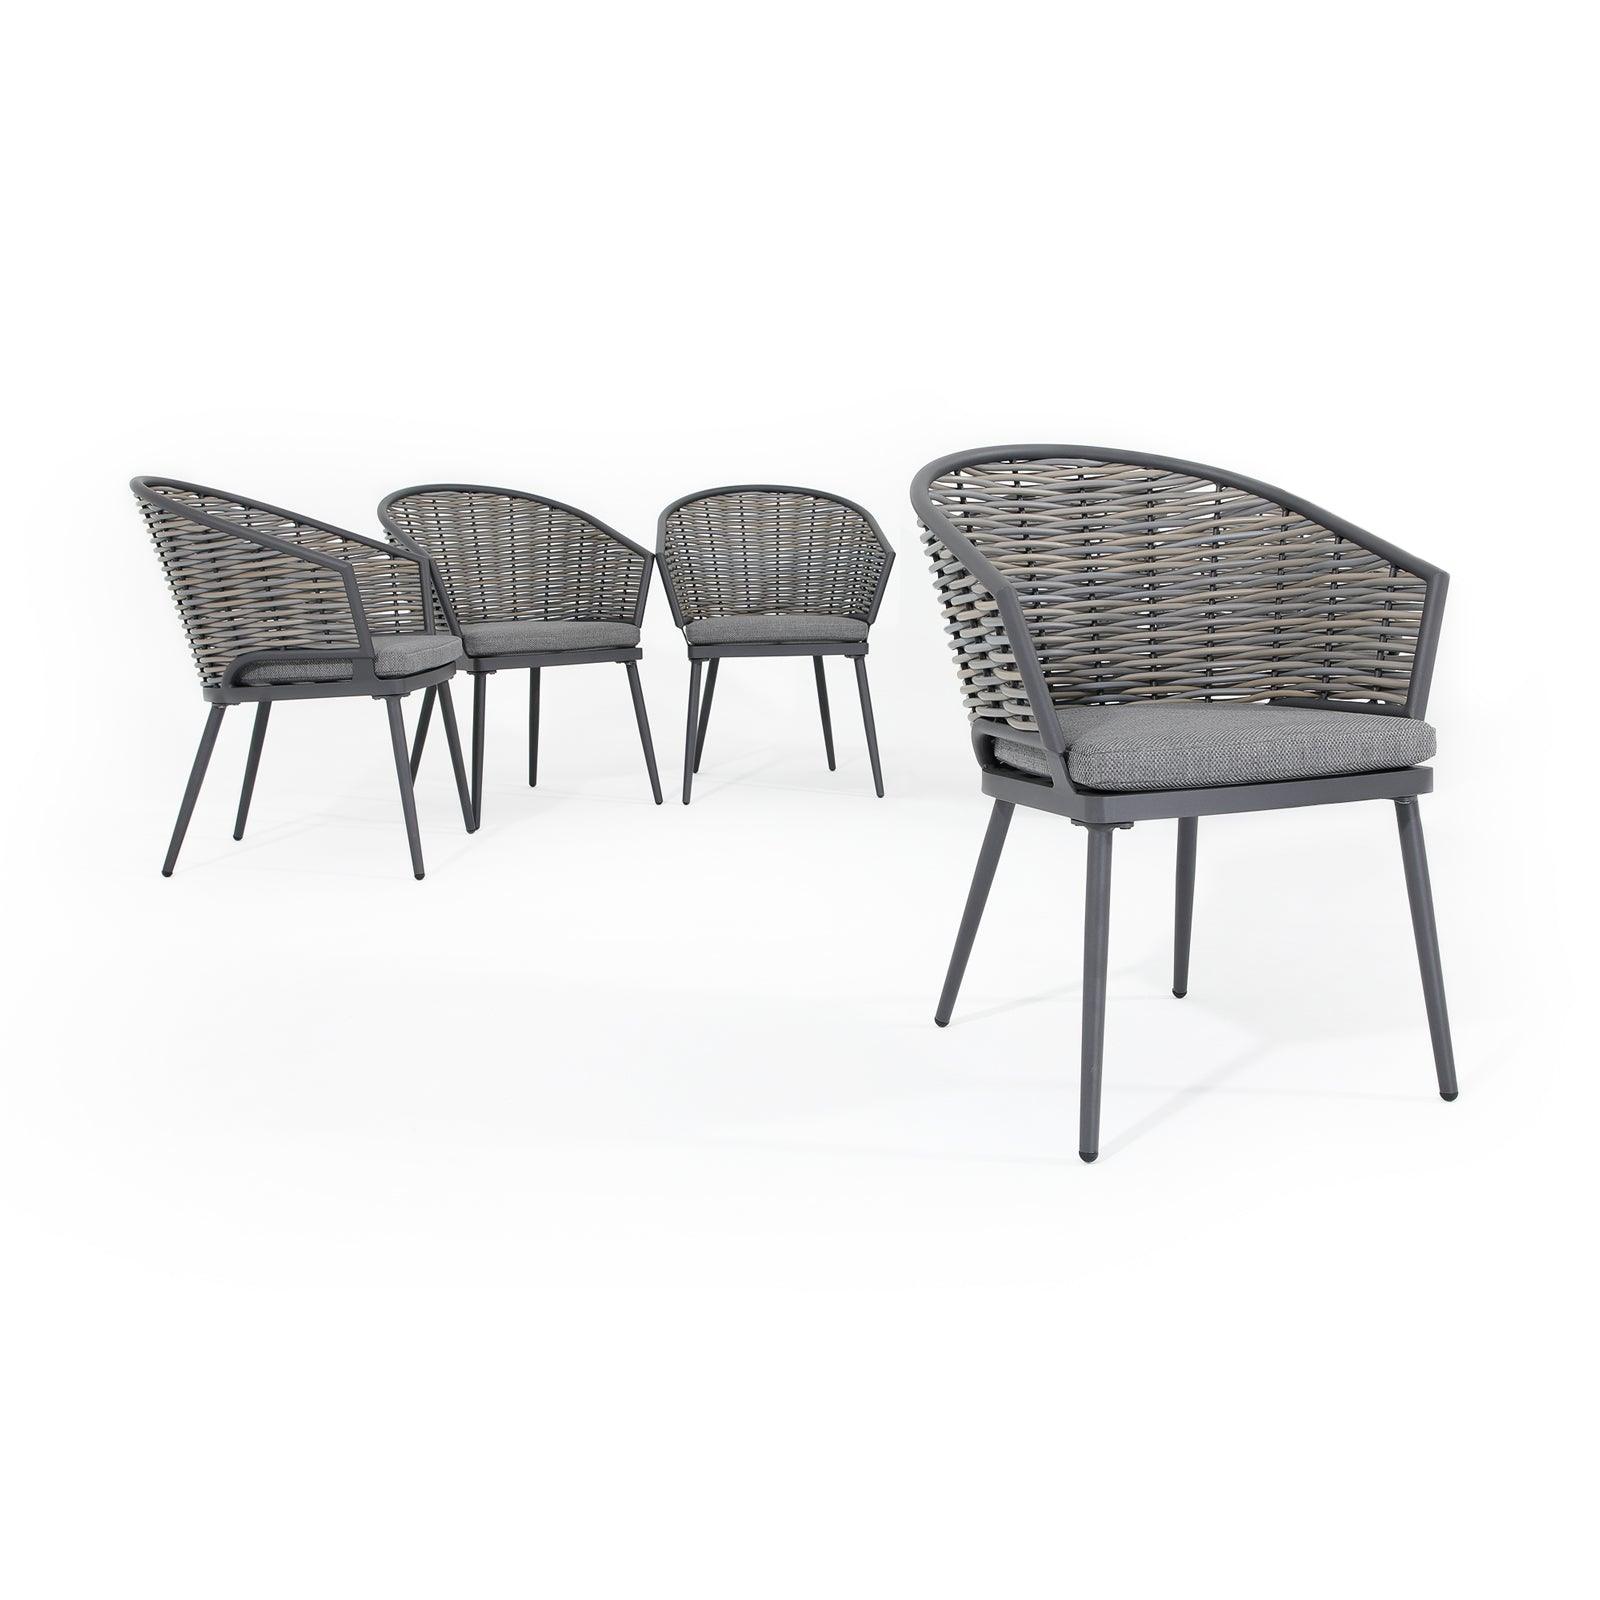 Burano Modern HDPE Wicker Outdoor Furniture, Grey wicker outdoor Dining chairs, aluminum frame, grey cushions, 4 chairs - Jardina Furniture #Pieces_4-pc.